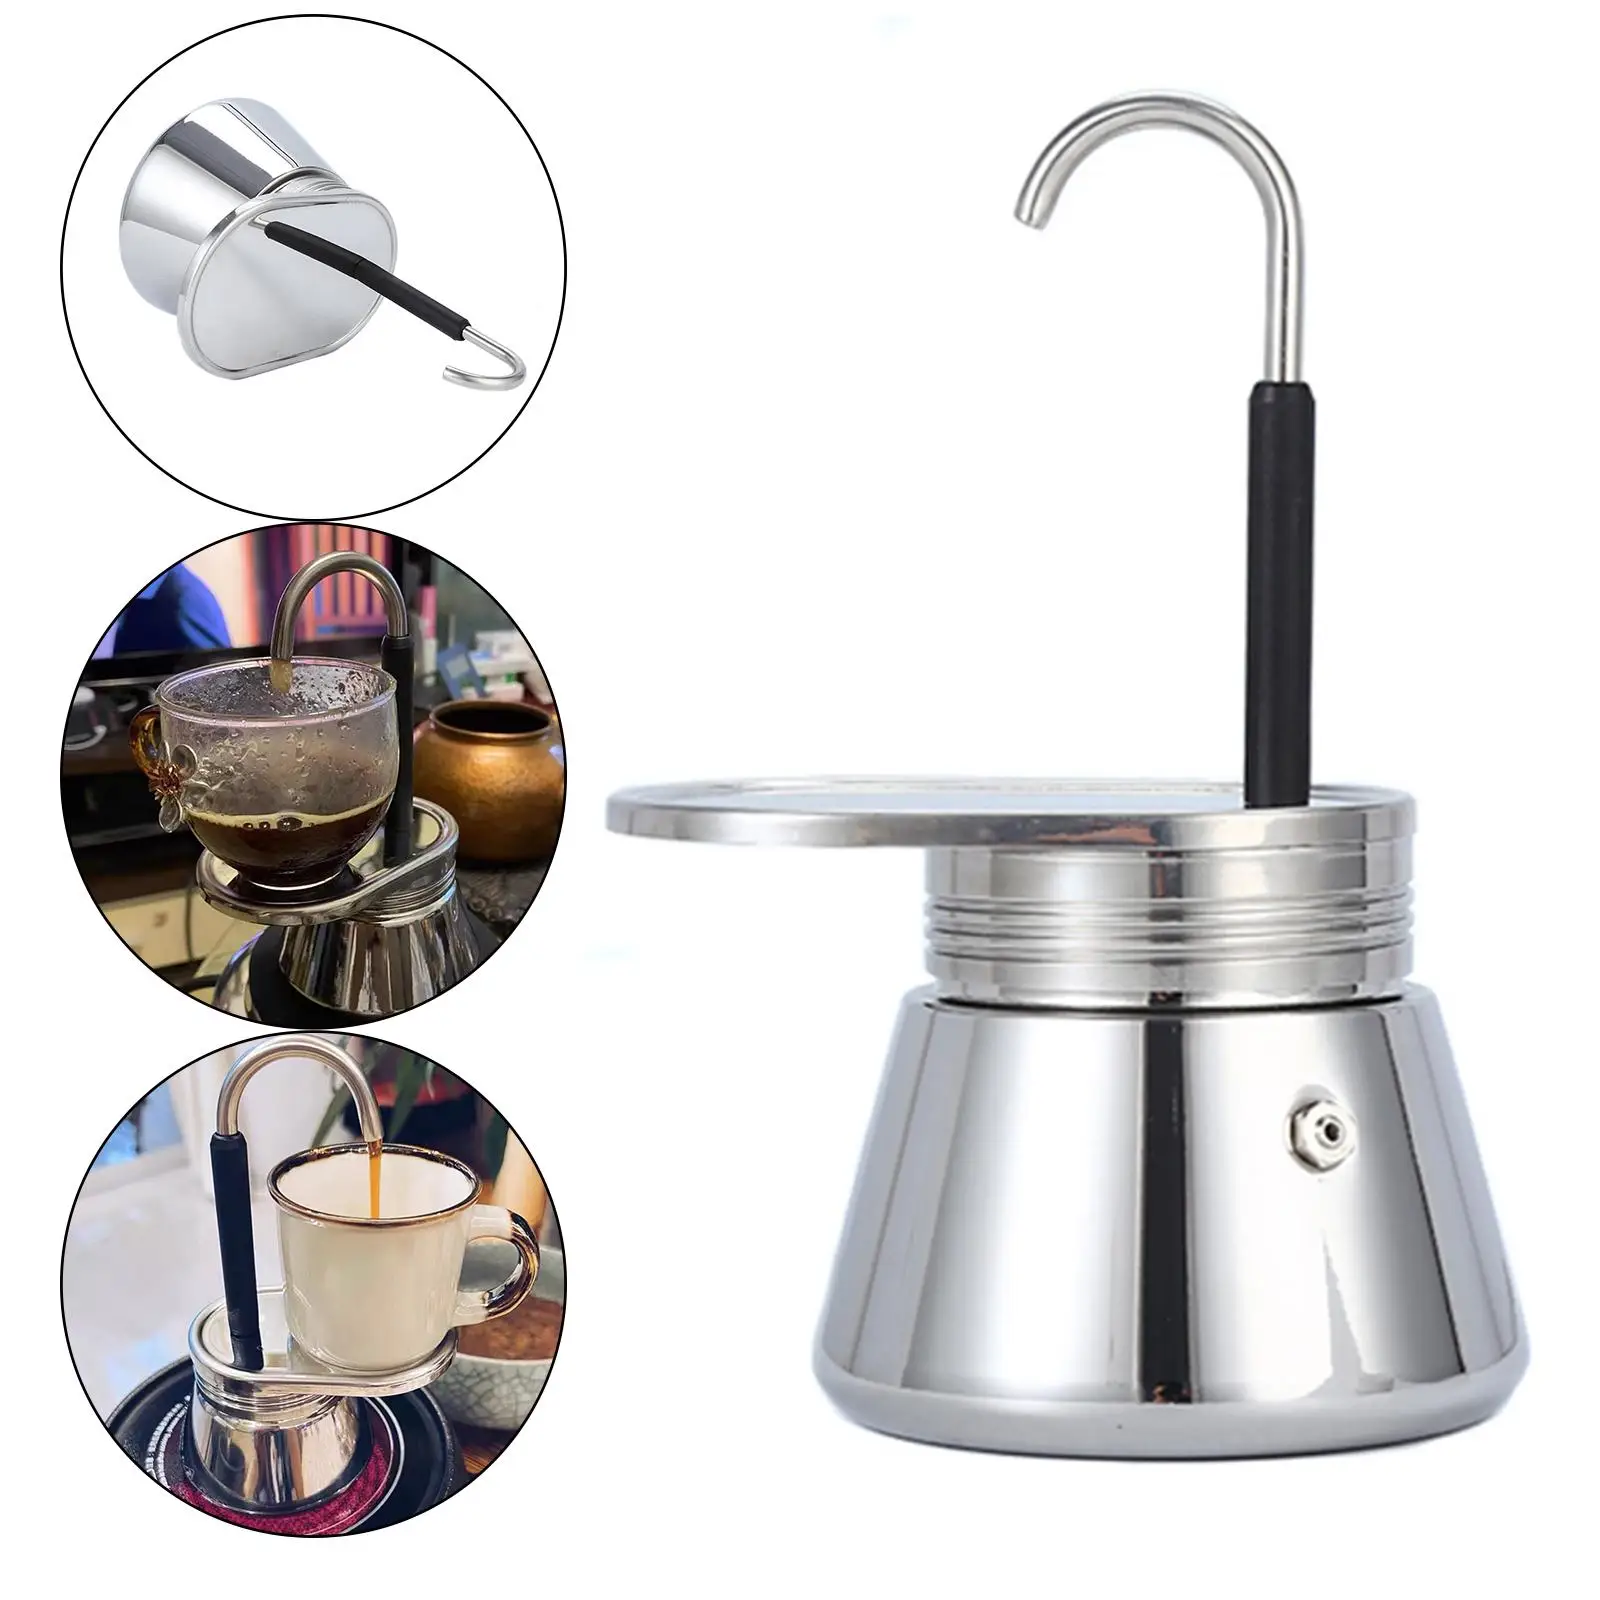 Traveling Stovetop Espresso Coffee Pot Stainless Steel, Convenient Easy to Operate Silver for Home Office Polished Portable DIY